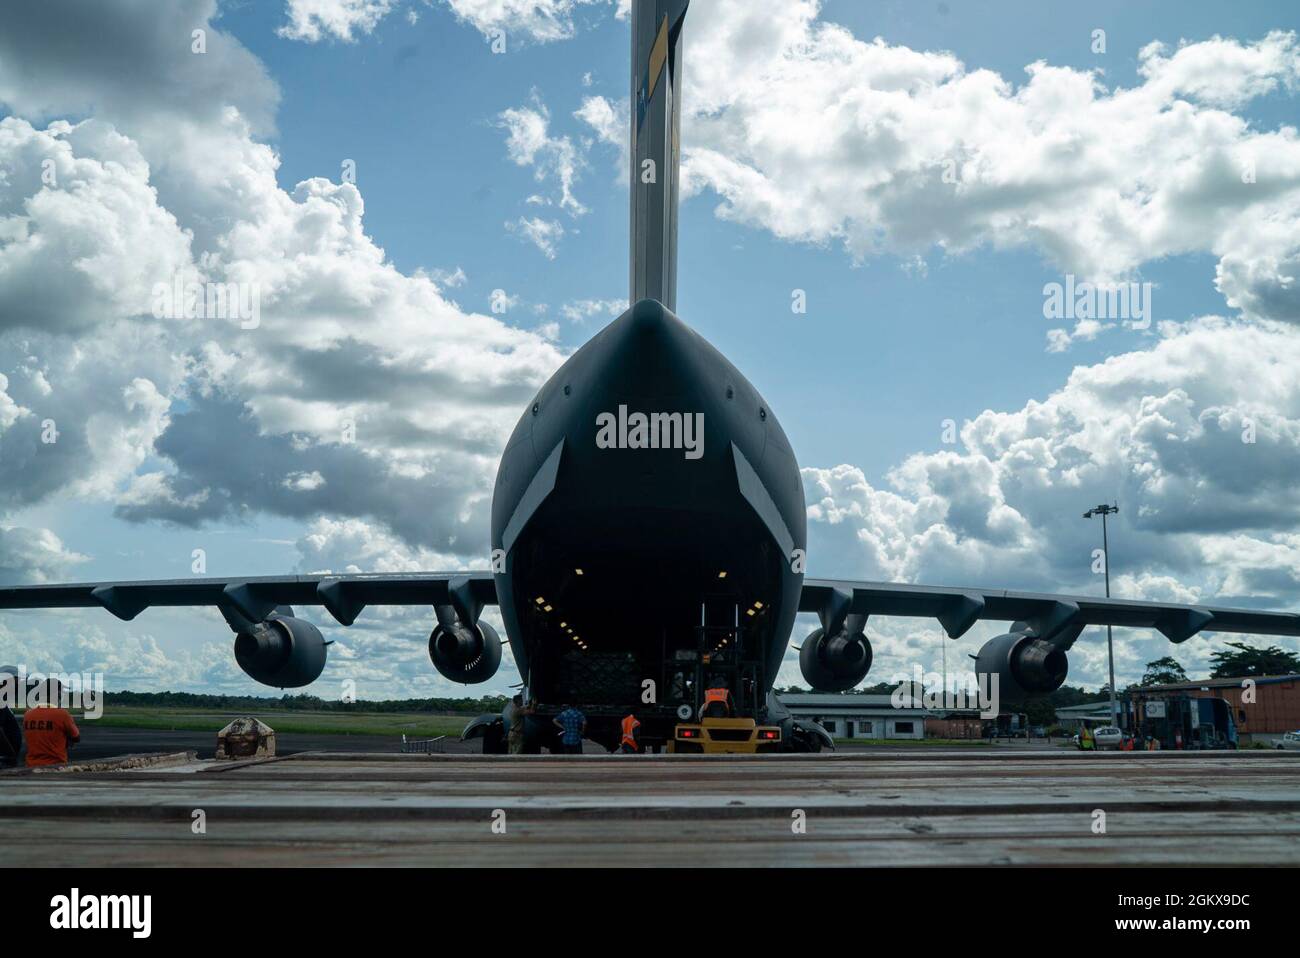 U.S. Air Force personnel and Surinamese locals unload field hospital equipment at Johan Adolf Pengel International Airport, Suriname, July 16, 2021. The portable field hospital, valued at $745,000, was donated by U.S. Southern Command Stock Photo